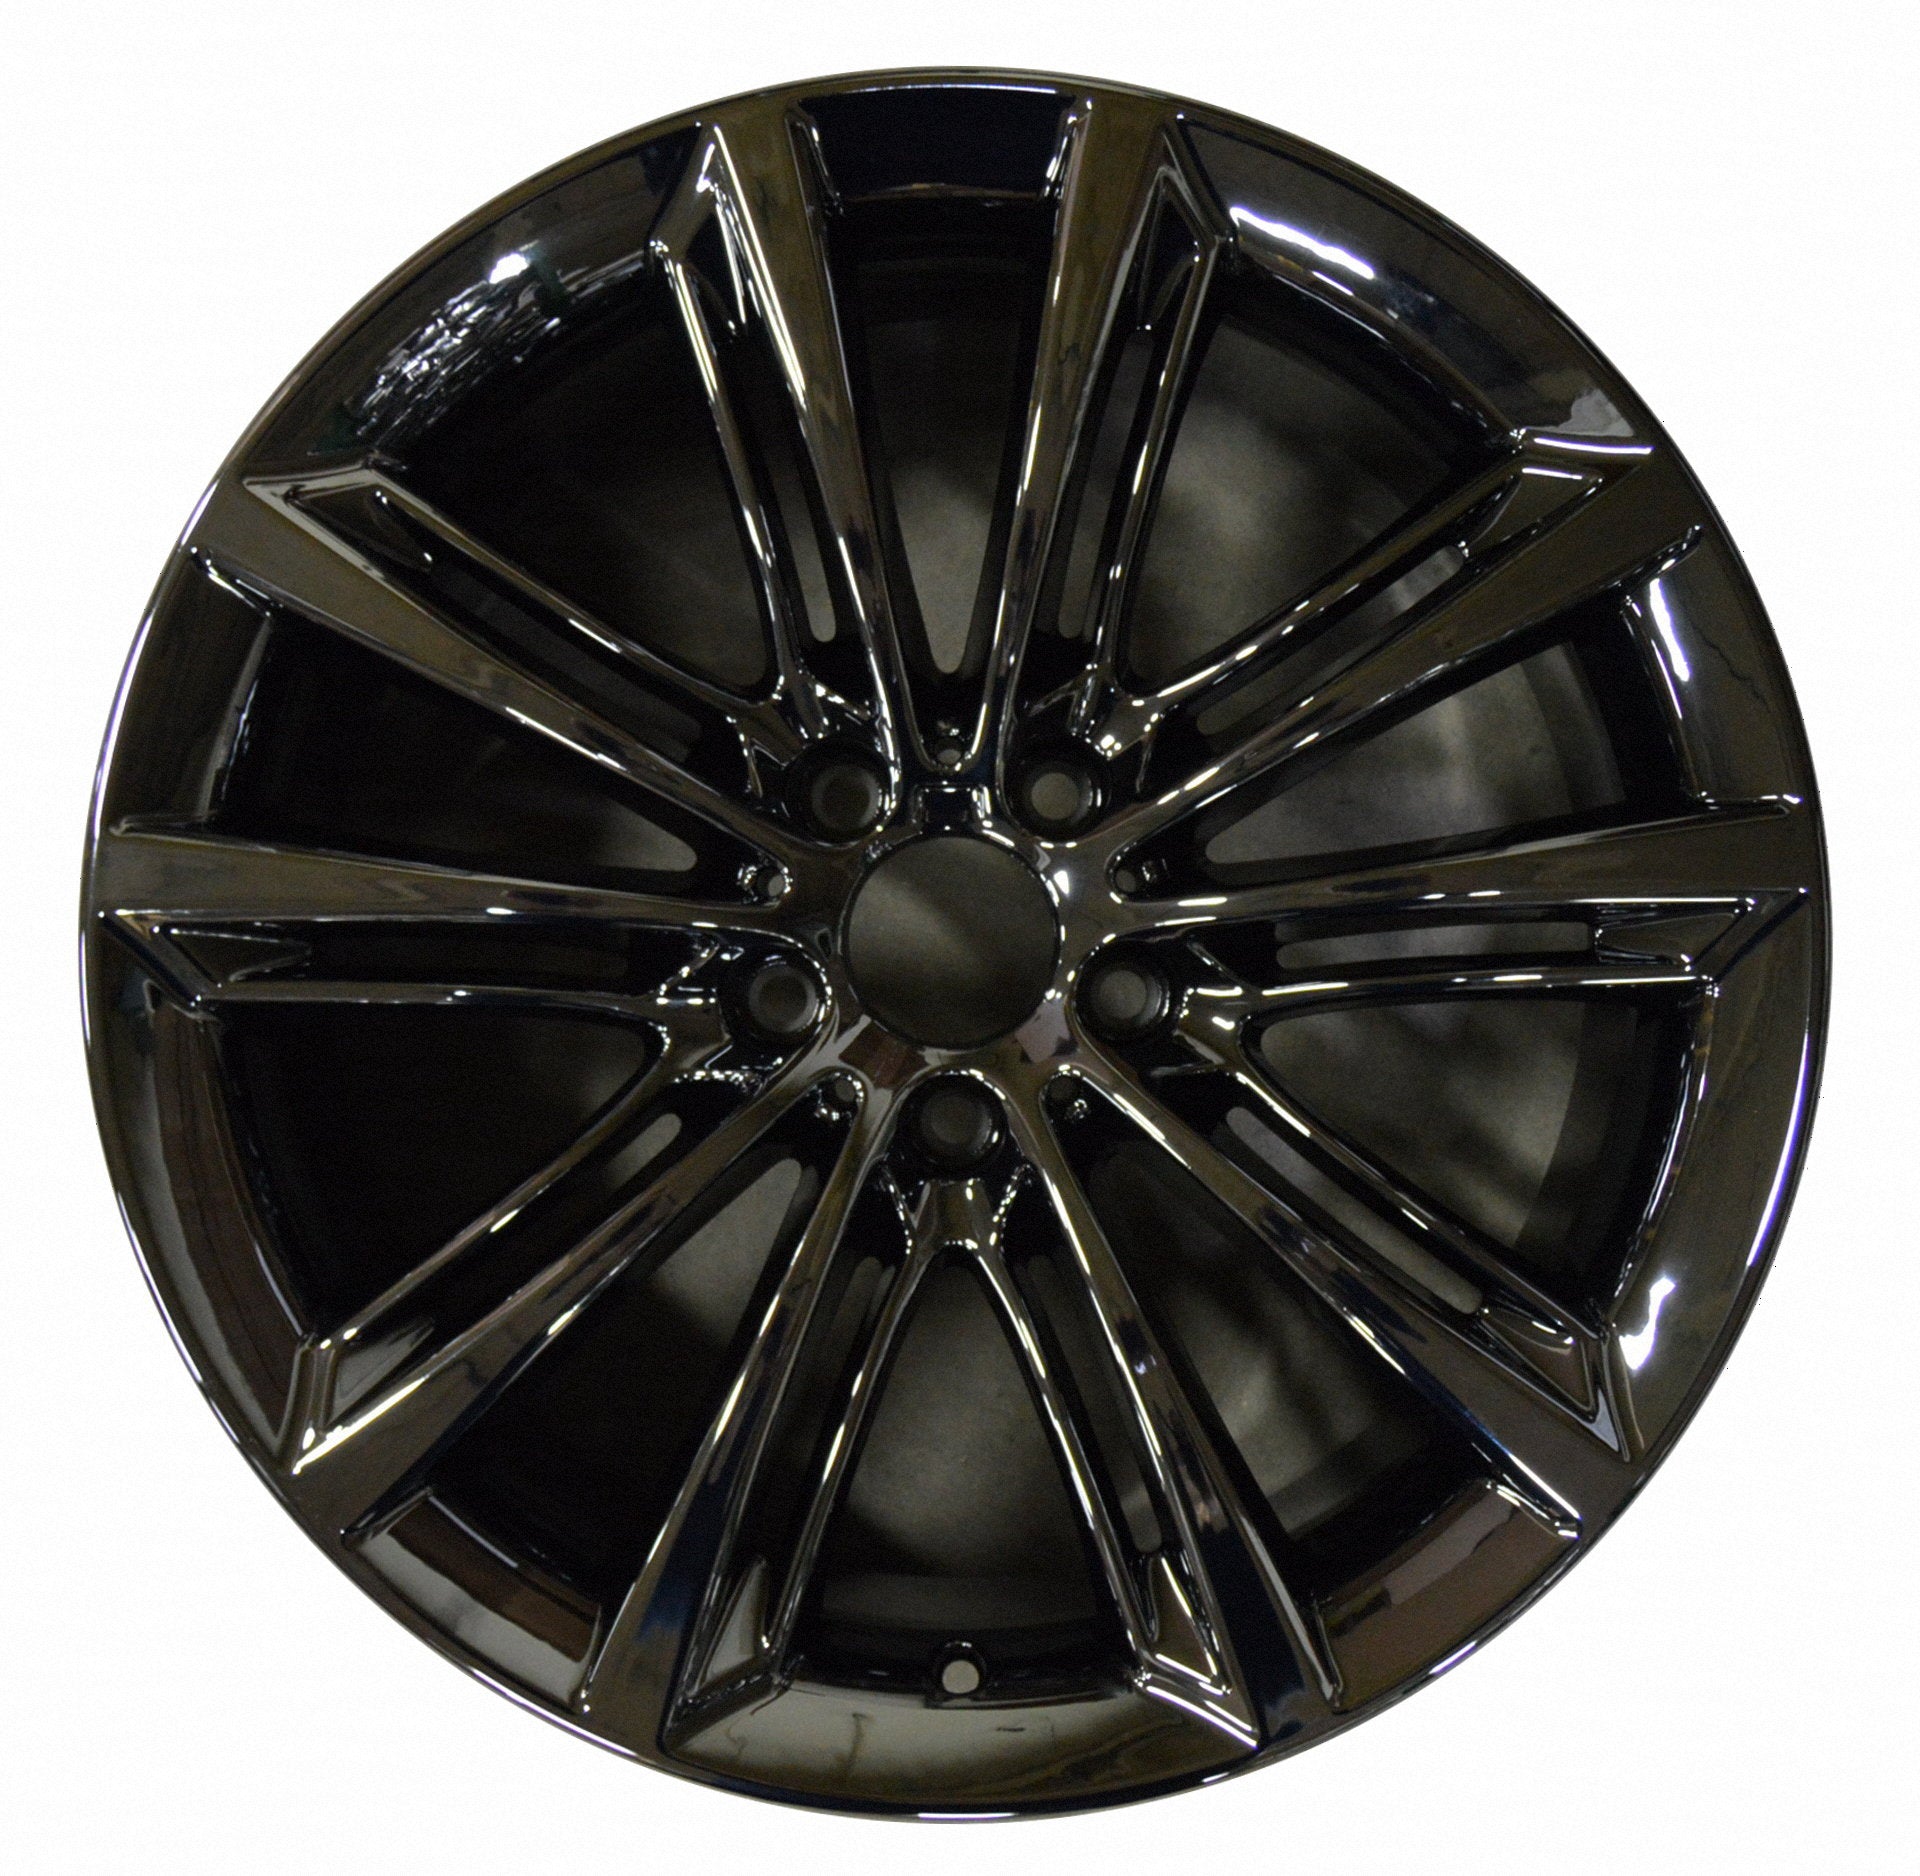 BMW 528i  2011, 2012, 2013, 2014, 2015, 2016 Factory OEM Car Wheel Size 20x9 Alloy WAO.71585RE.PVD2.FF